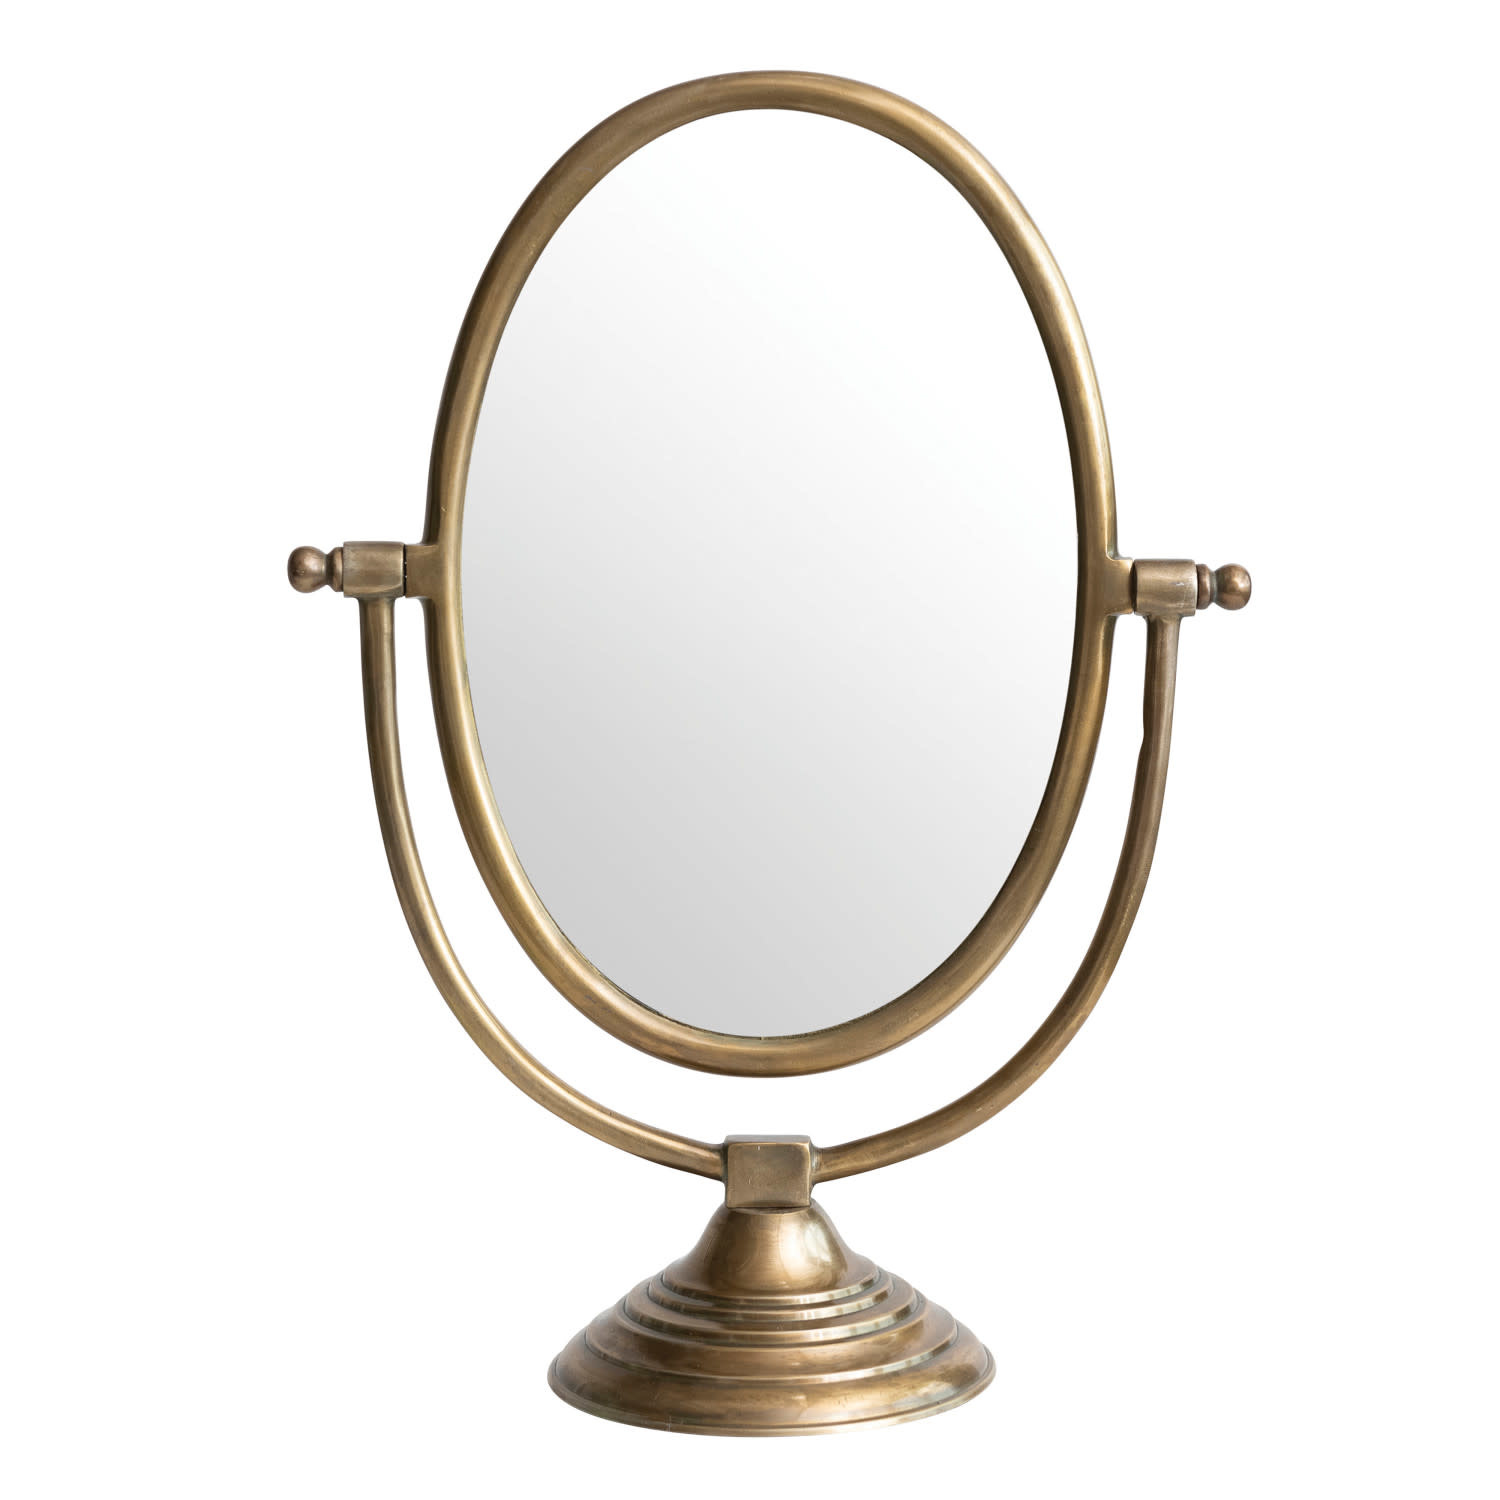 Framed Mirror on Stand, Antique Brass Finish 15.5"x21", Available for local pick up